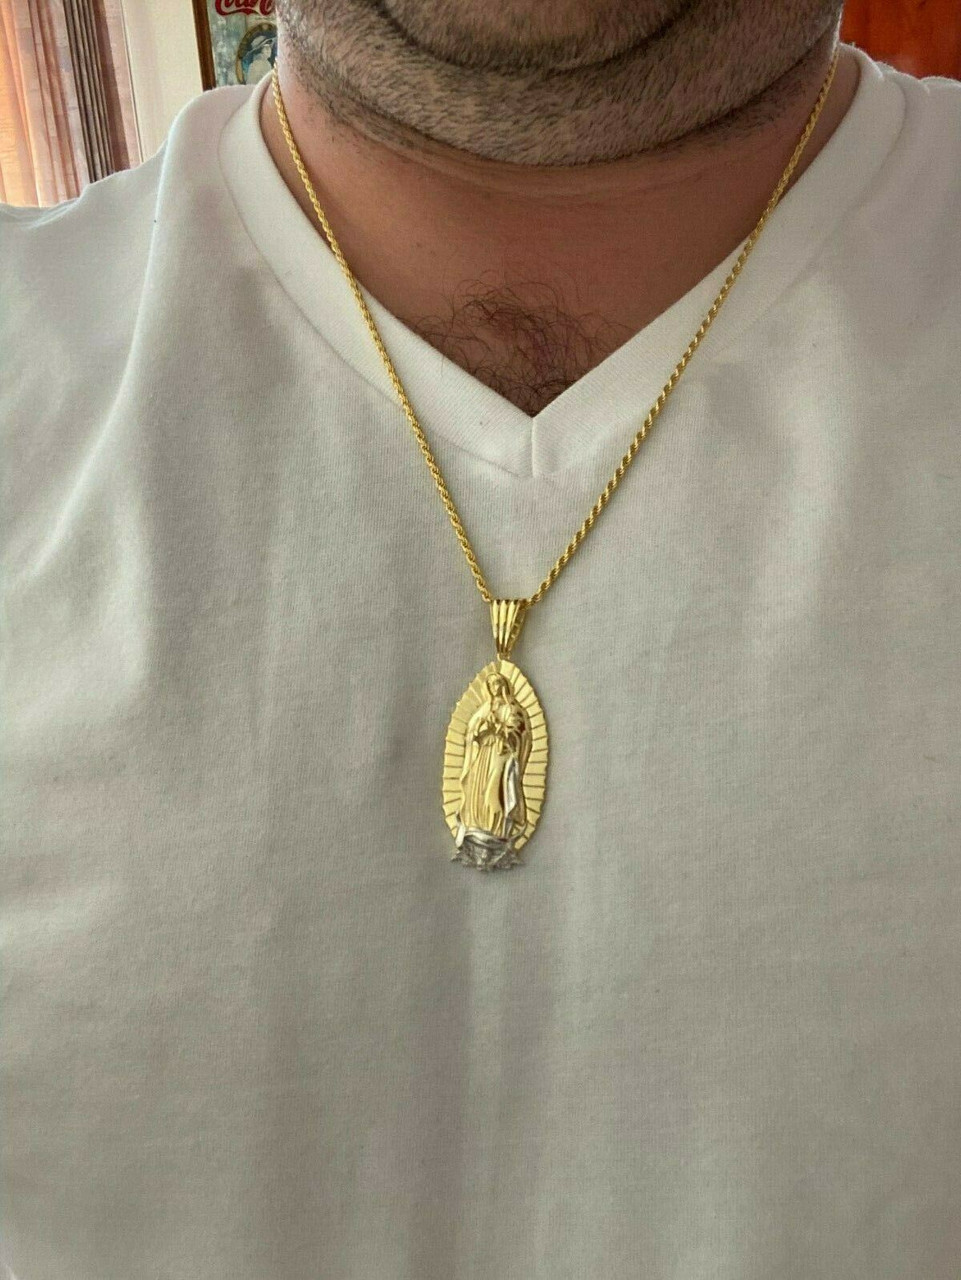 harlembling mens virgin mary pendant 14k gold over solid 925 sterling silver necklace 71469.1664375881